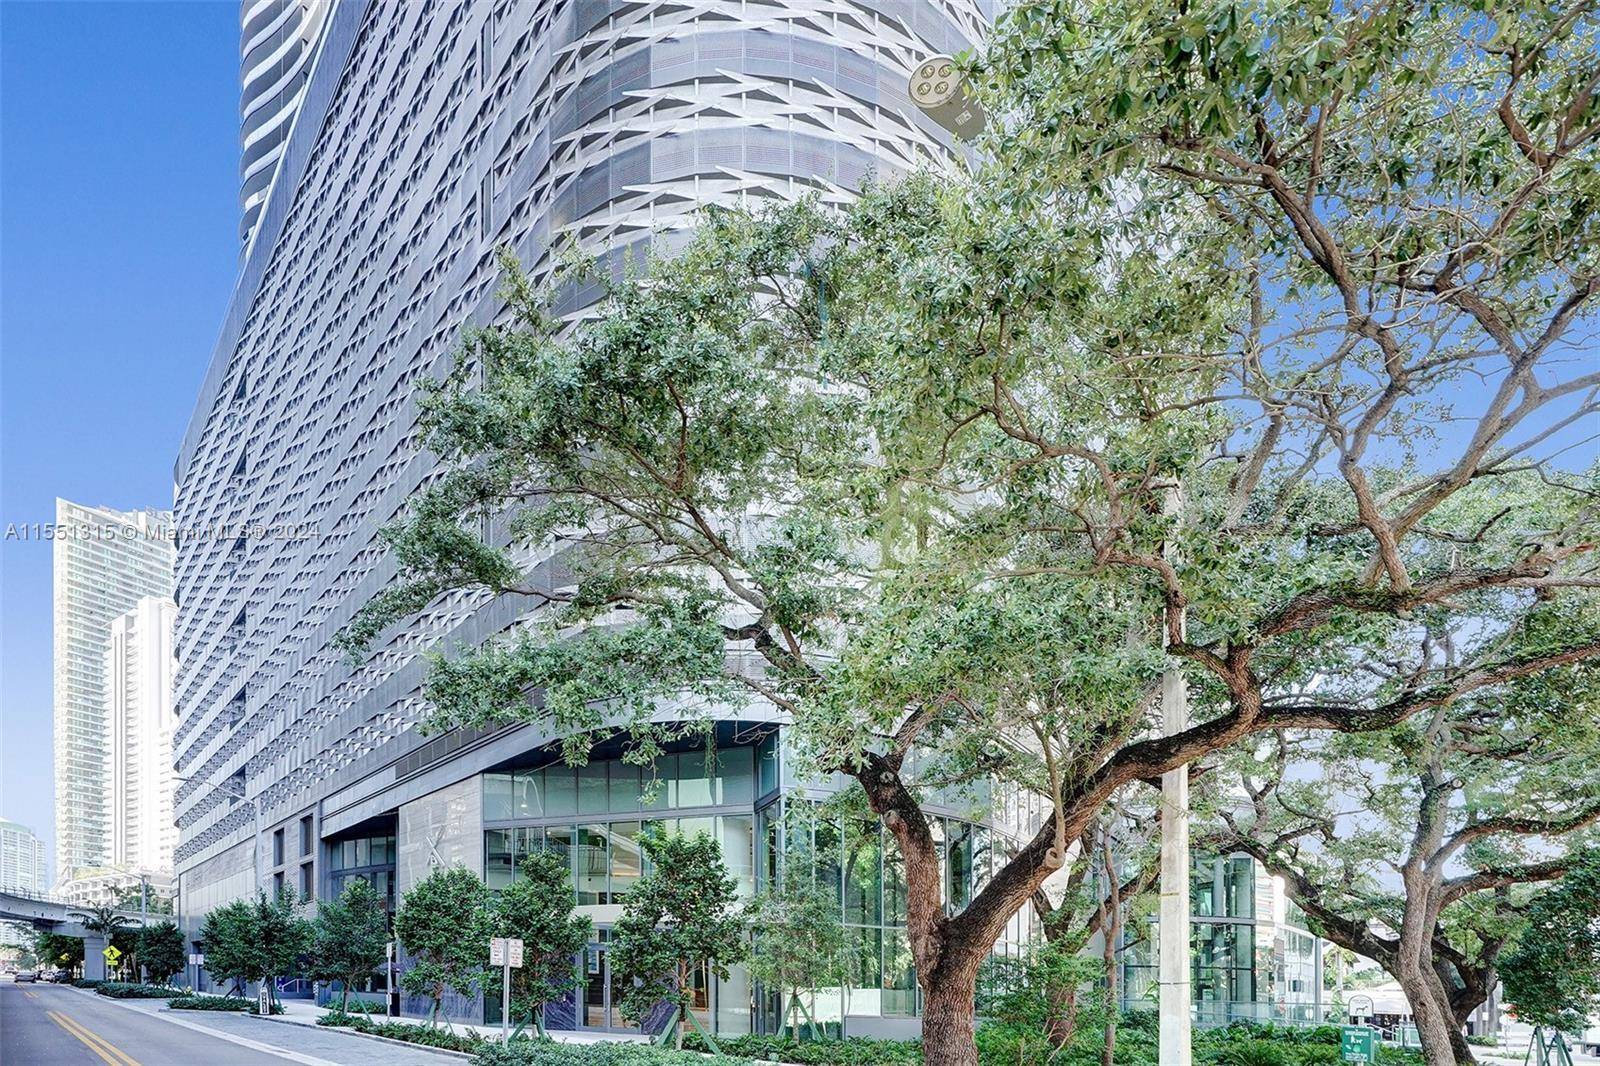 Brickell Flatiron is one of the tallest buildings in Brickell, 64 stories high and spacious residences.